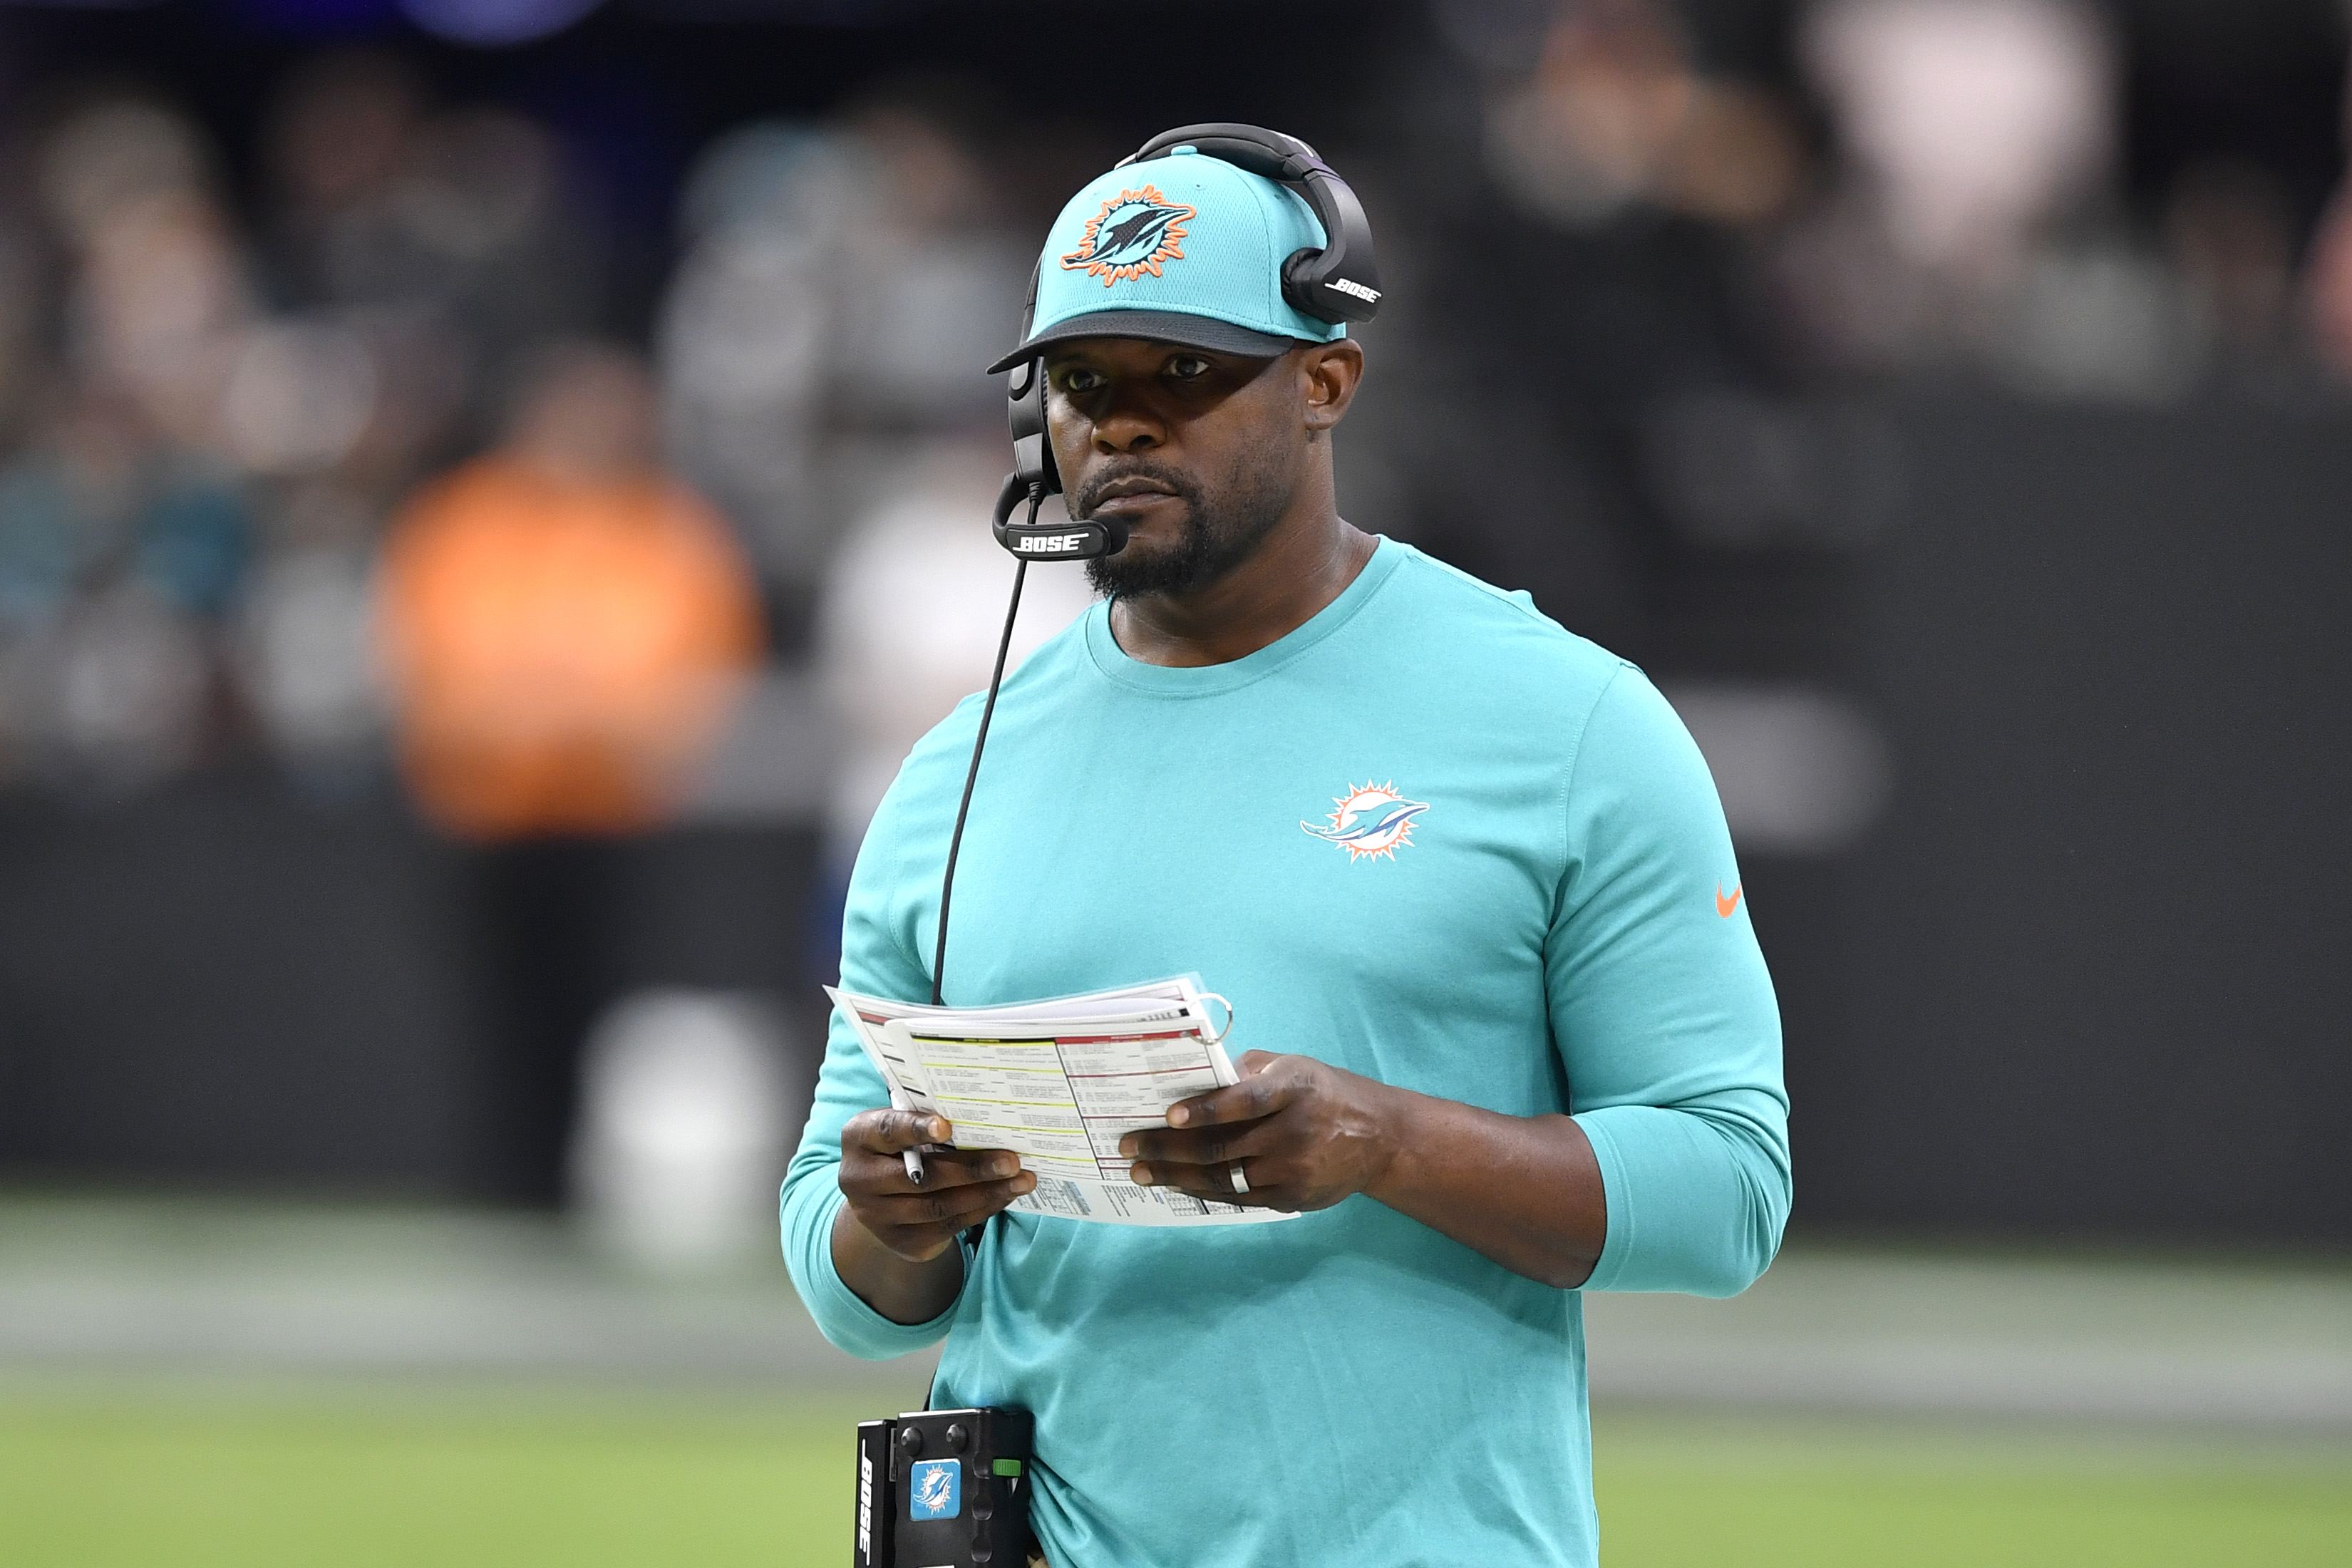 LAS VEGAS, NEVADA - SEPTEMBER 26: Head coach Brian Flores of the Miami Dolphins looks on during the second half of a game against the Las Vegas Raiders at Allegiant Stadium on September 26, 2021 in Las Vegas, Nevada. The Raiders defeated the Dolphins 31-28 in overtime.